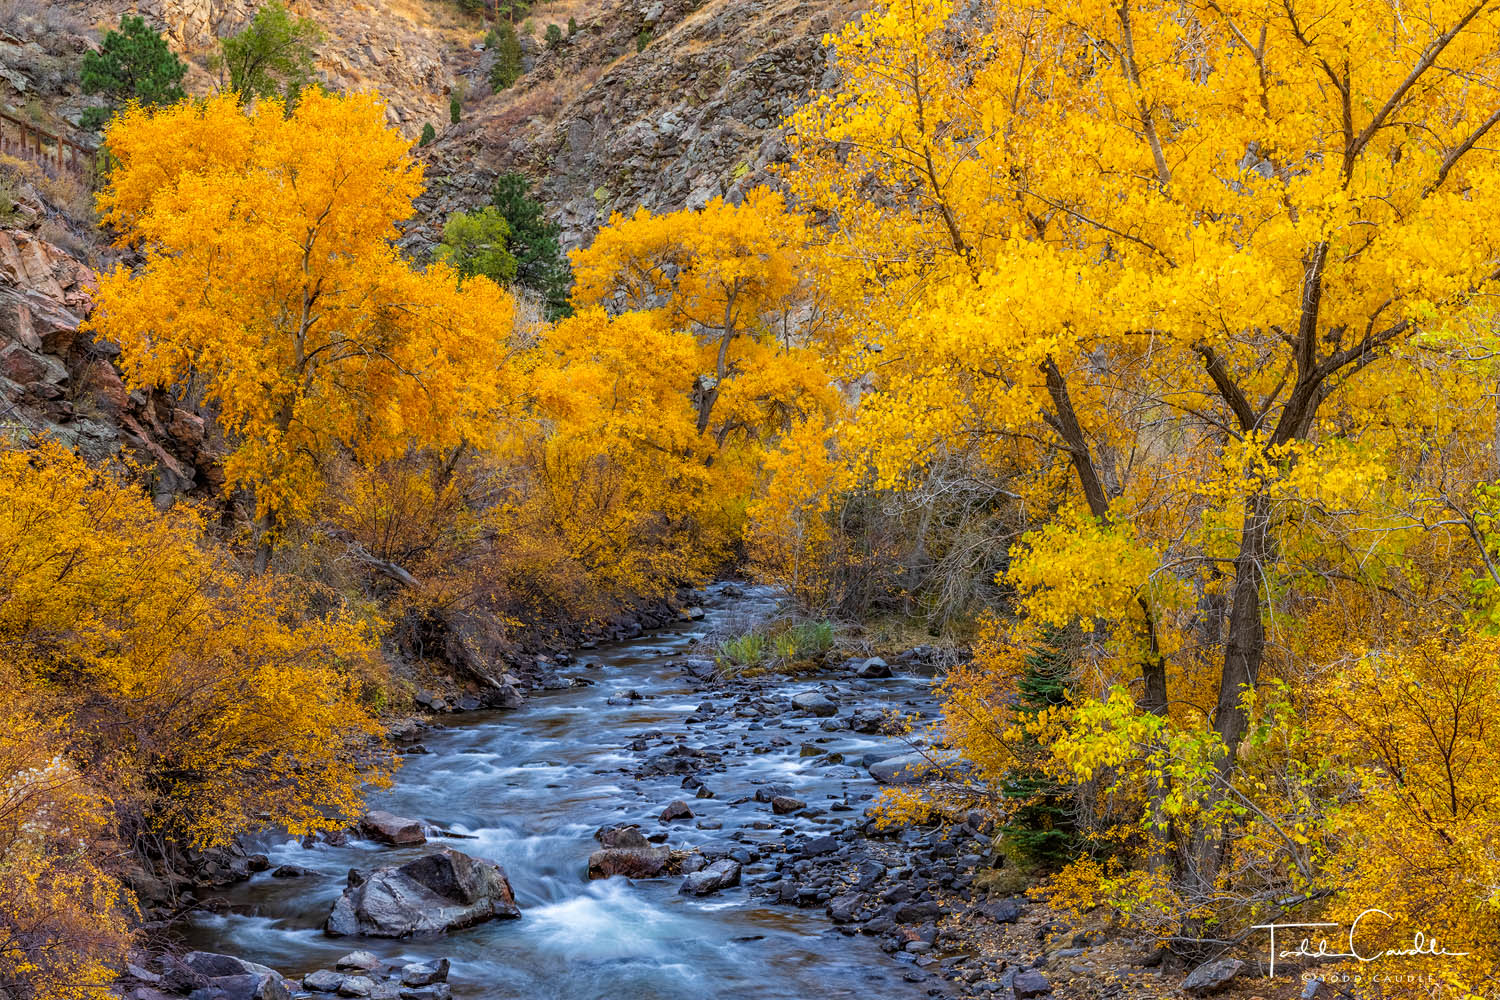 Vibrant fall colors flourish along Clear Creek on a newly constructed section of trail in Clear Creek Canyon.